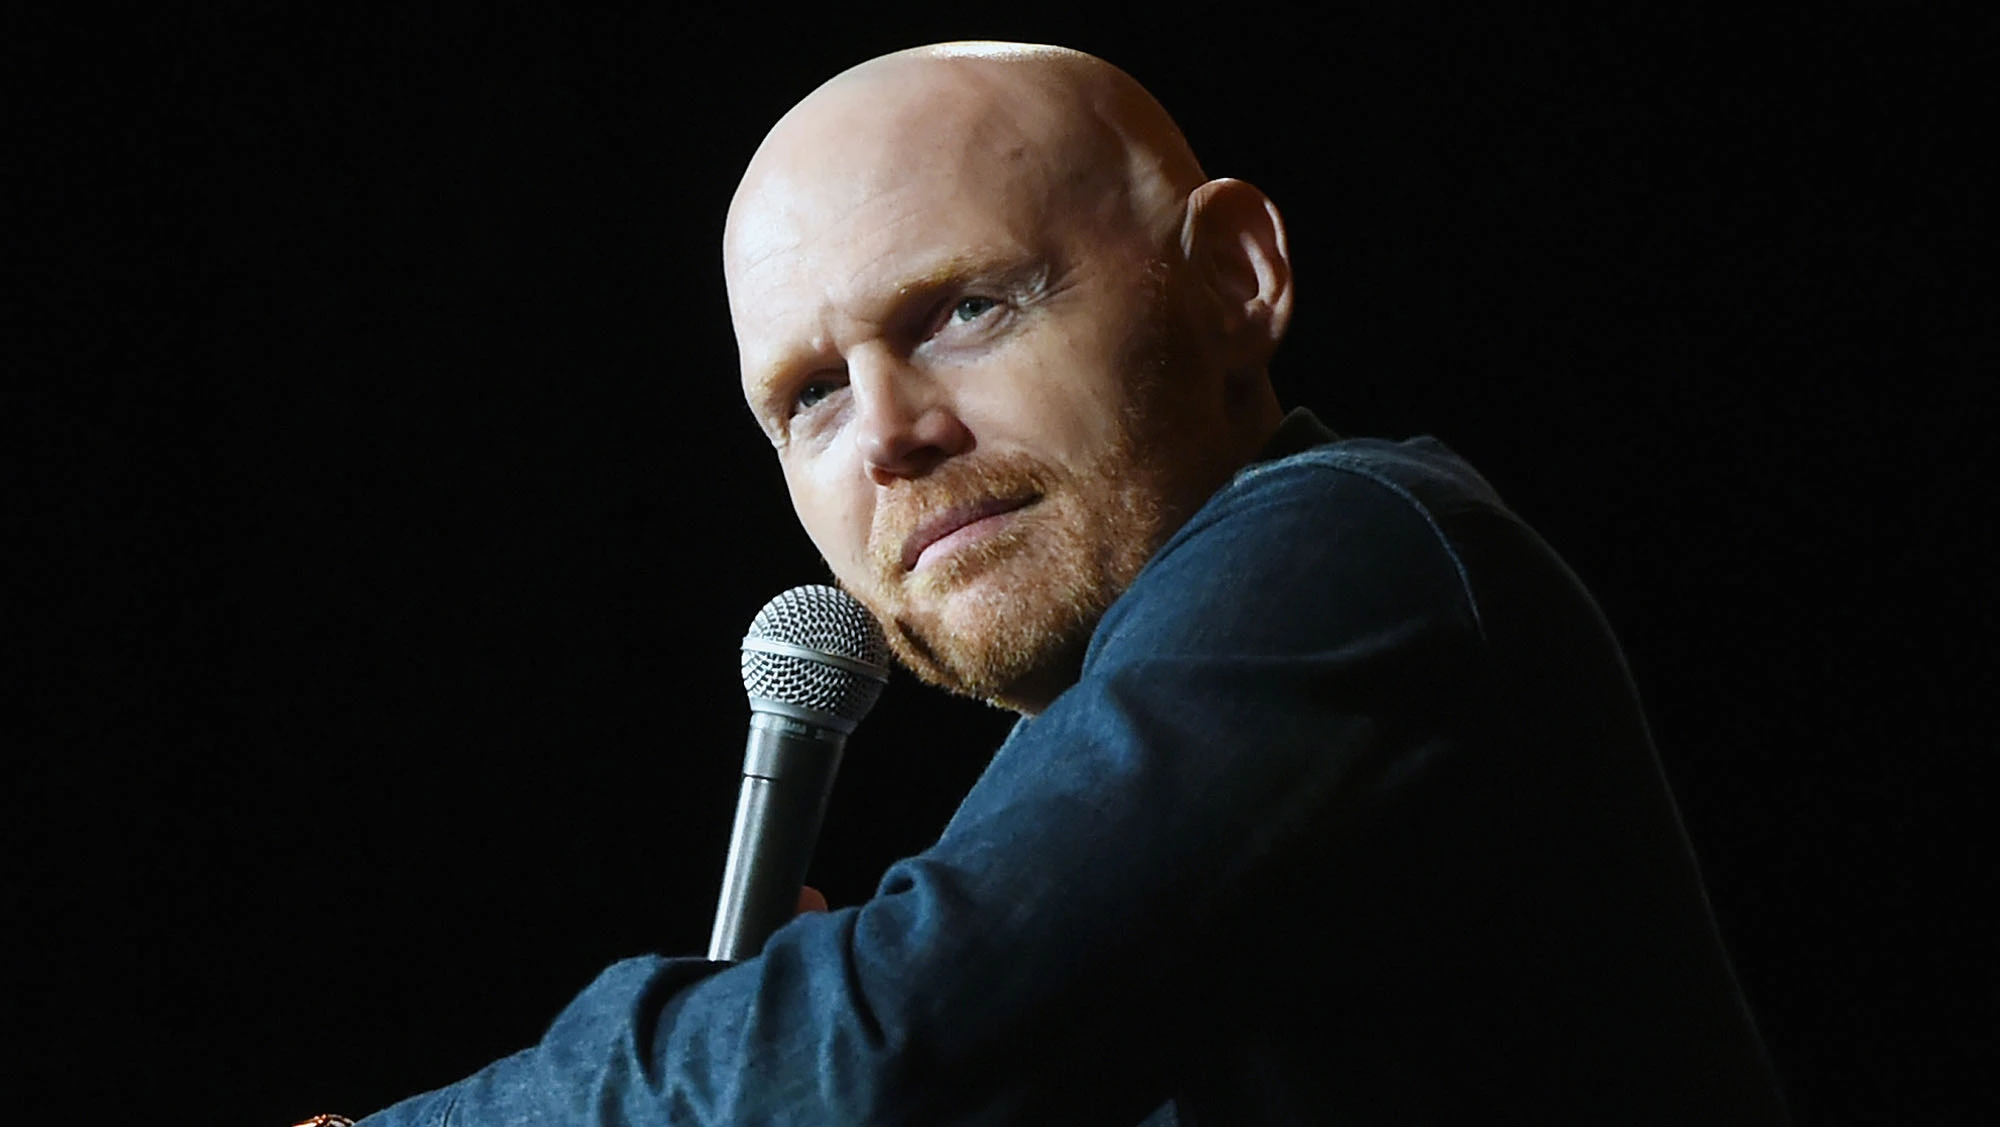 Bill Burr divides the internet with abortion